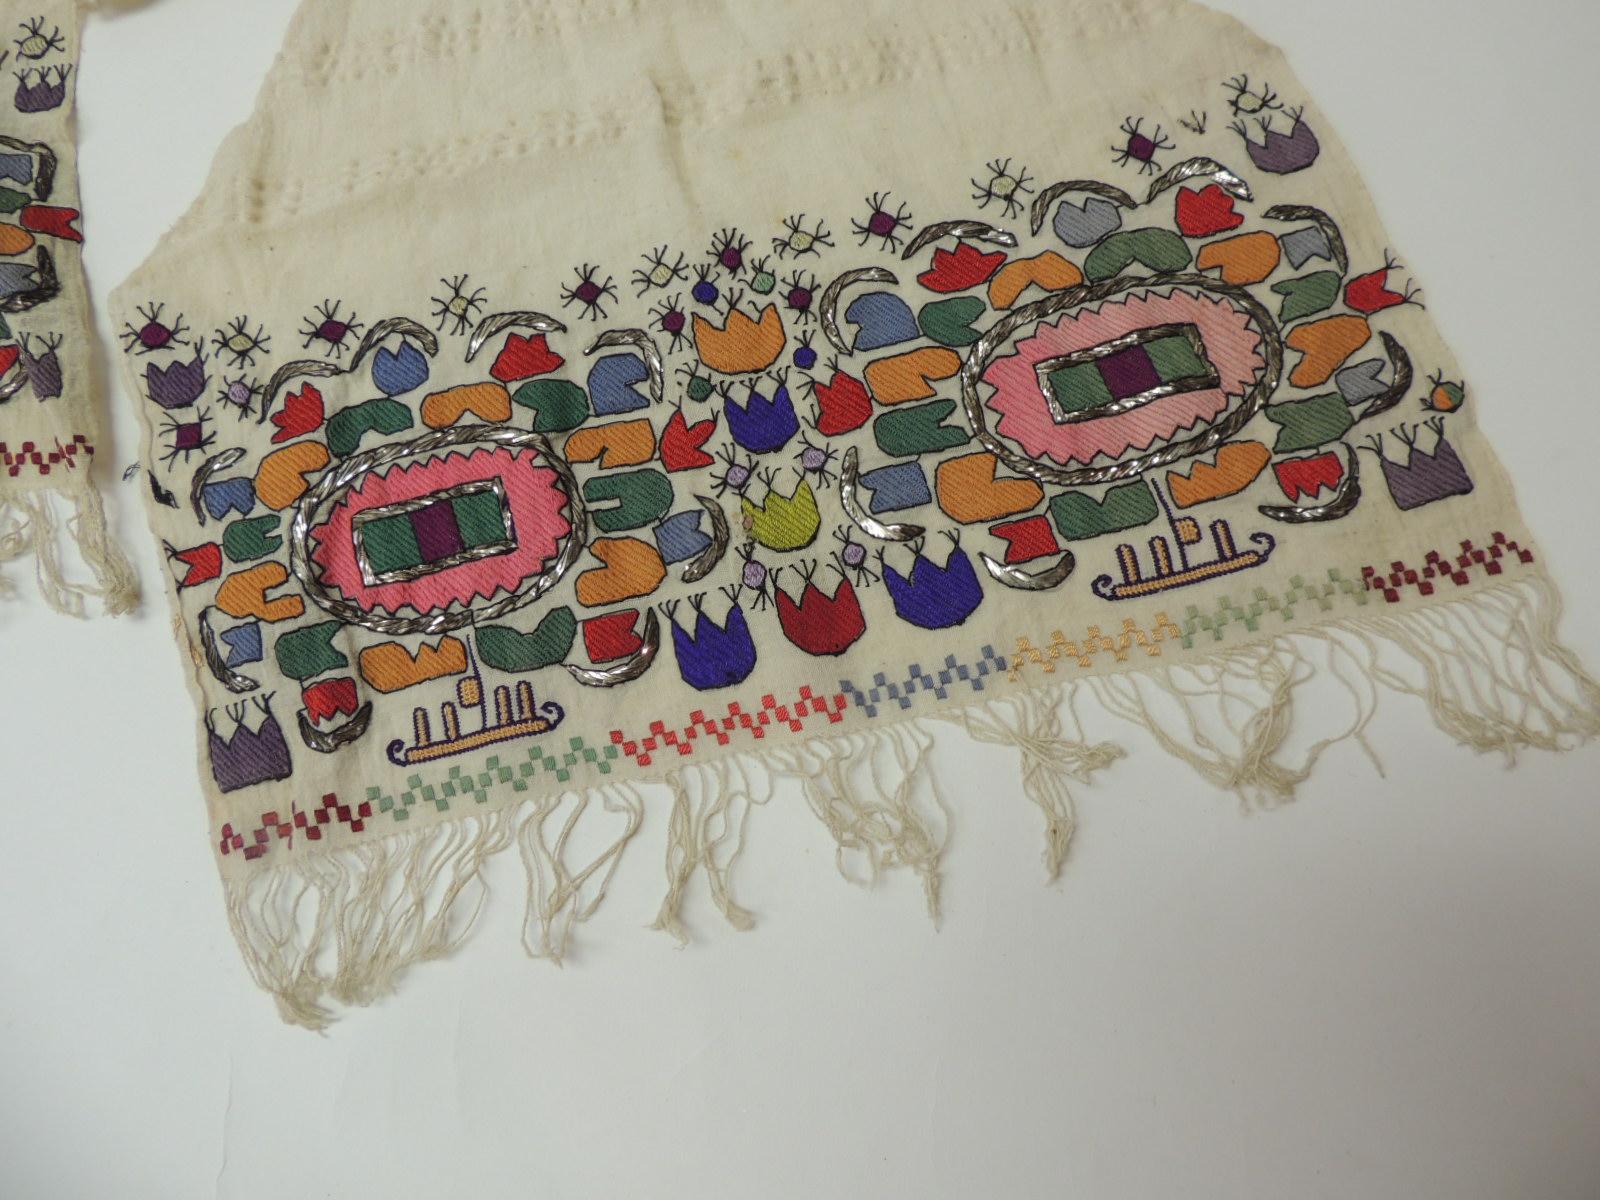 Vintage Turkish linen scarf with heavy embroidery in silk and metallic floss threads
Floral pattern hand embroidered in shades of hot pink, green, red, purple, celedon and black.
Two inches of hand knotted fringes.
Embroidery panels are size 8 x